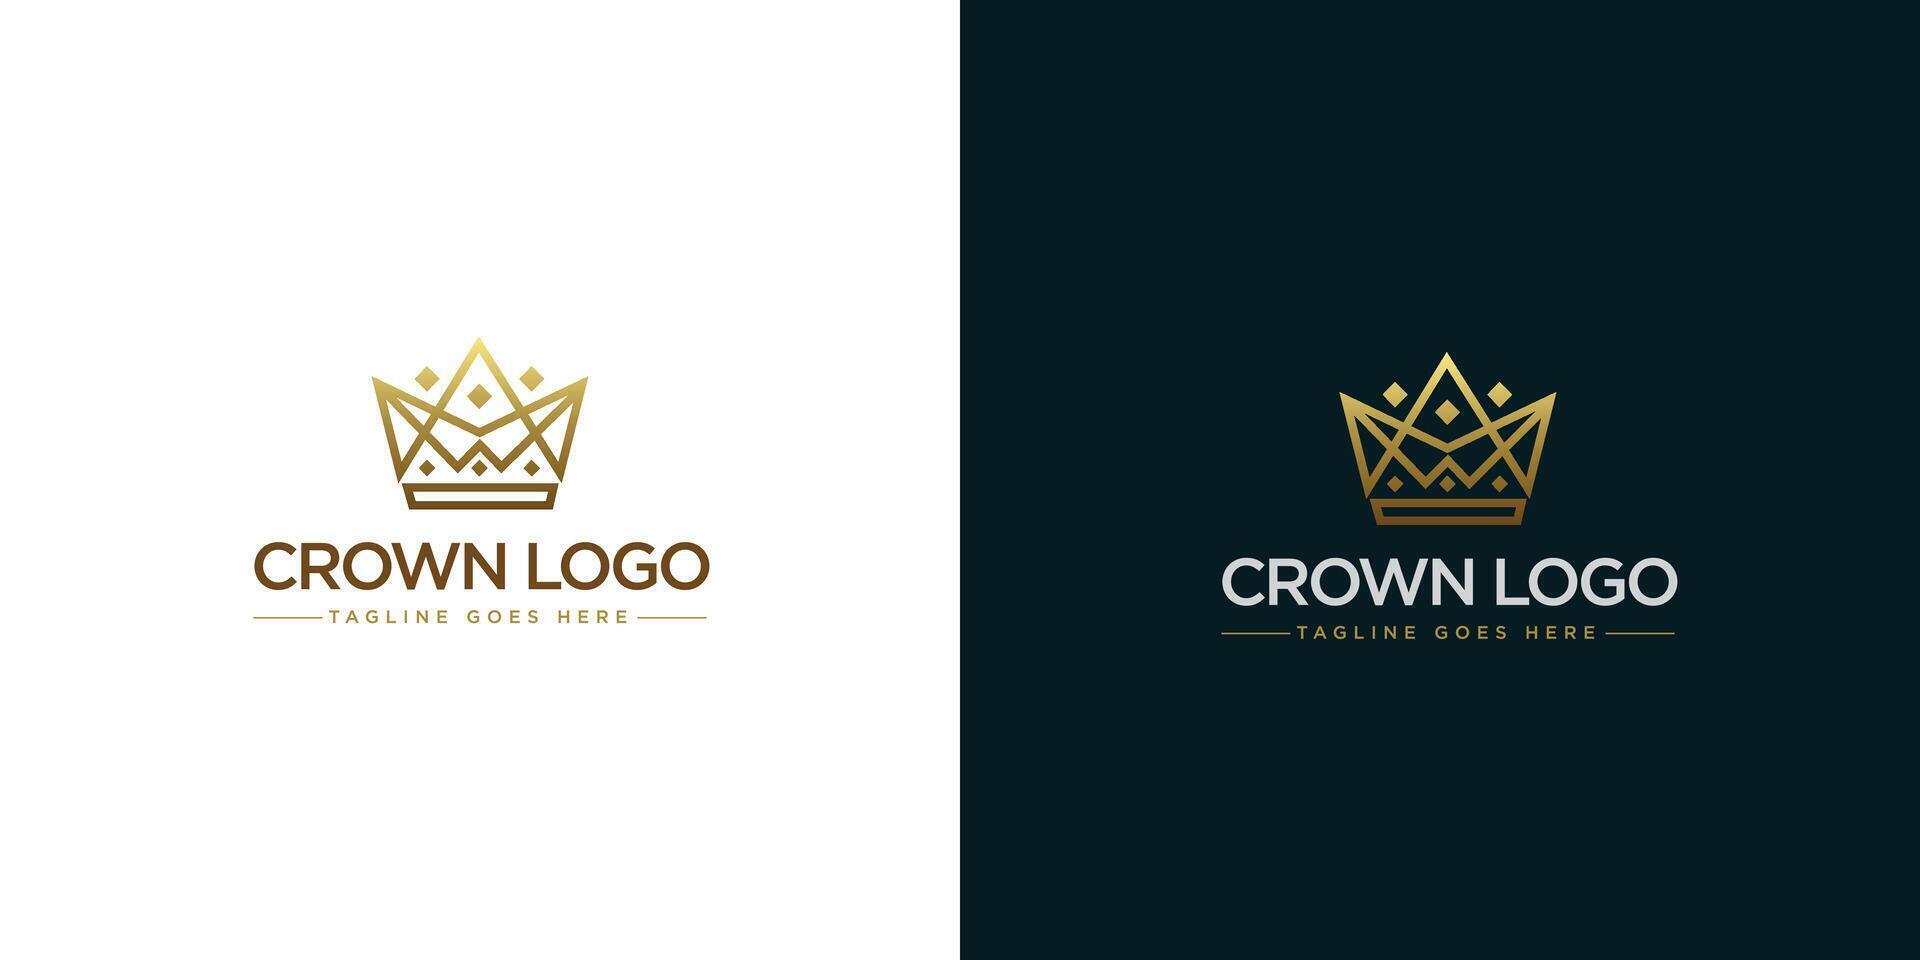 Gold crown logo illustration with minimalist design style vector